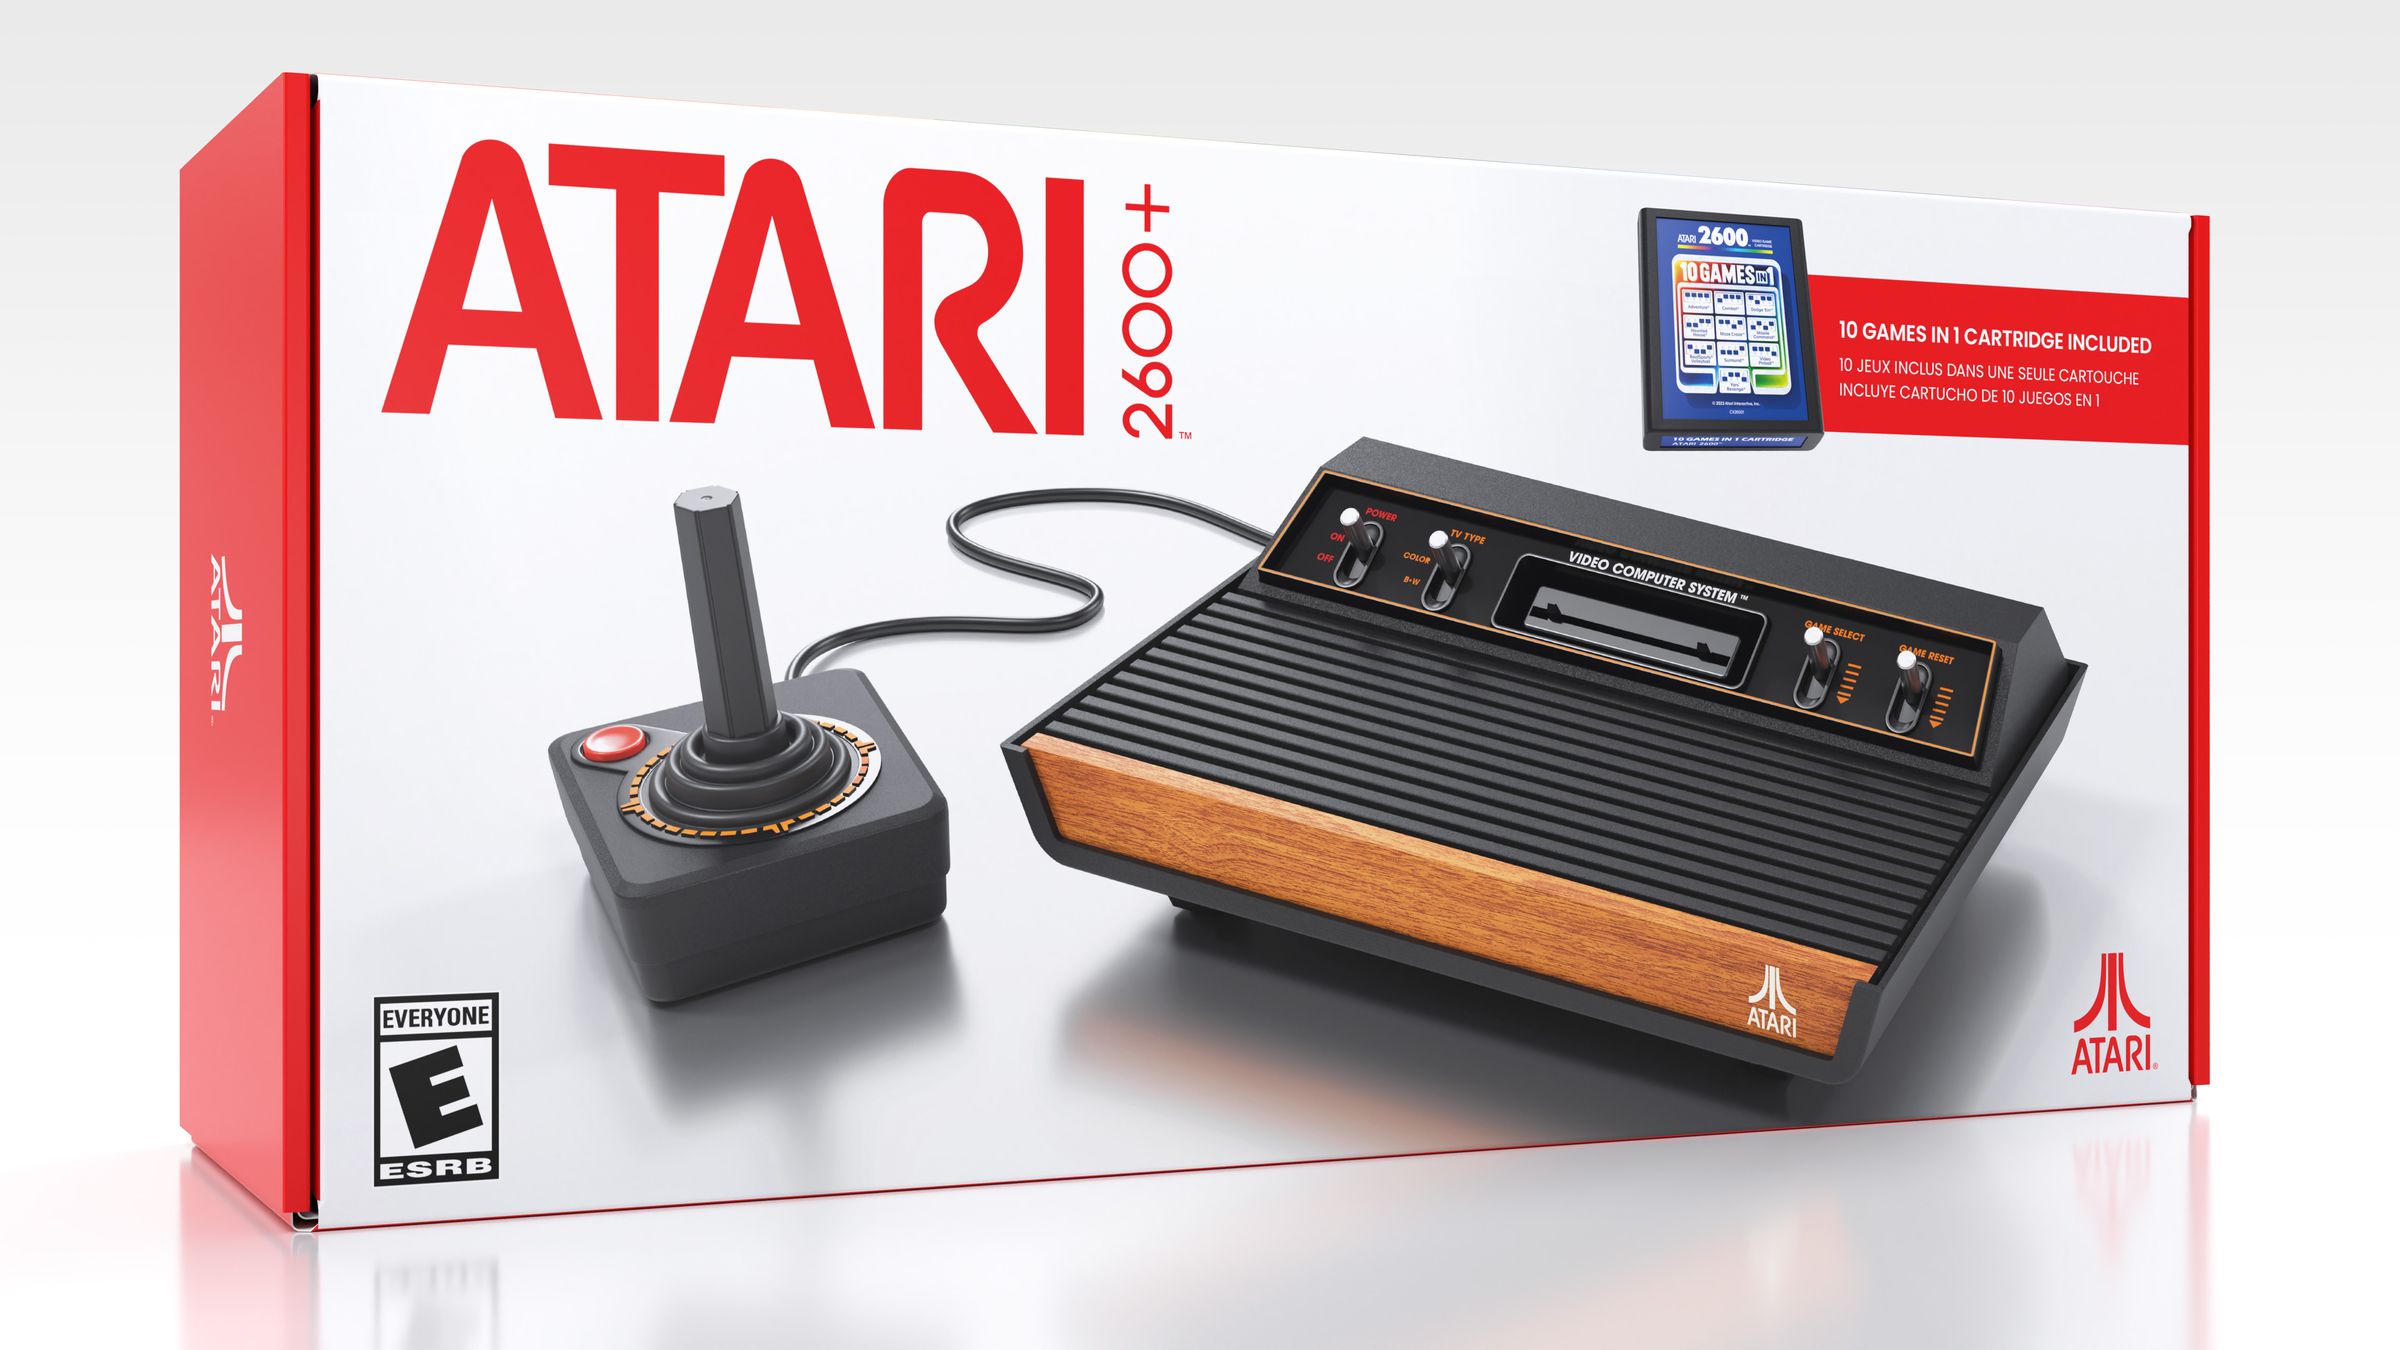 A picture of the Atari 2600 Plus in a white box with red edges. The box has the Atari 2600 Plus name in the top right, an Atari logo in the bottom right, and a picture of the 10-in-1 game cartridge on the top right.